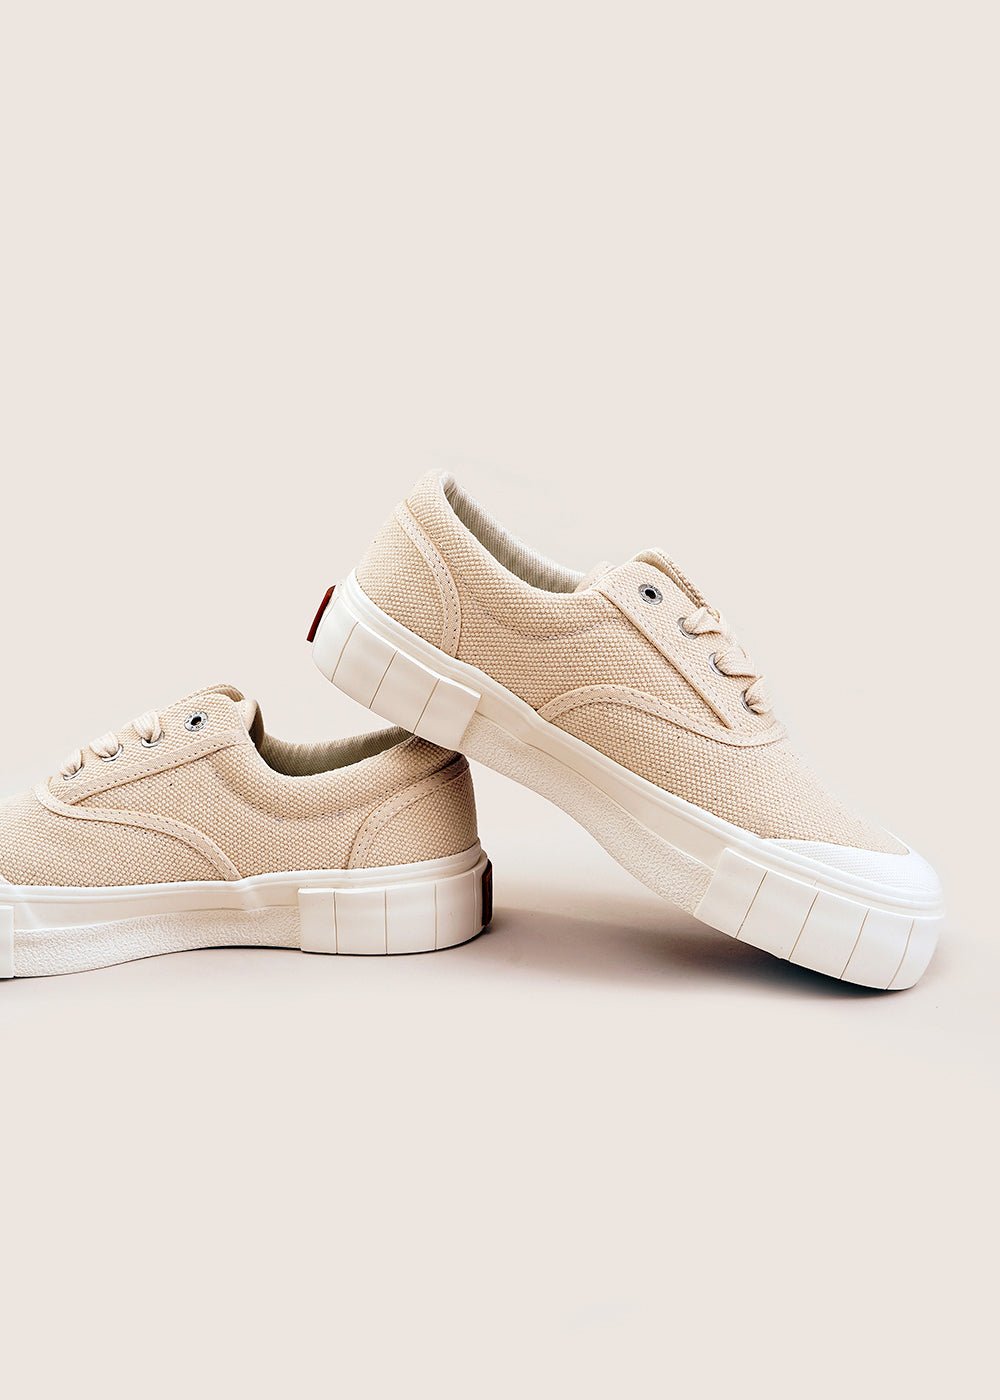 GOOD NEWS Oatmeal Opal Core Sneakers - New Classics Studios Sustainable Ethical Fashion Canada